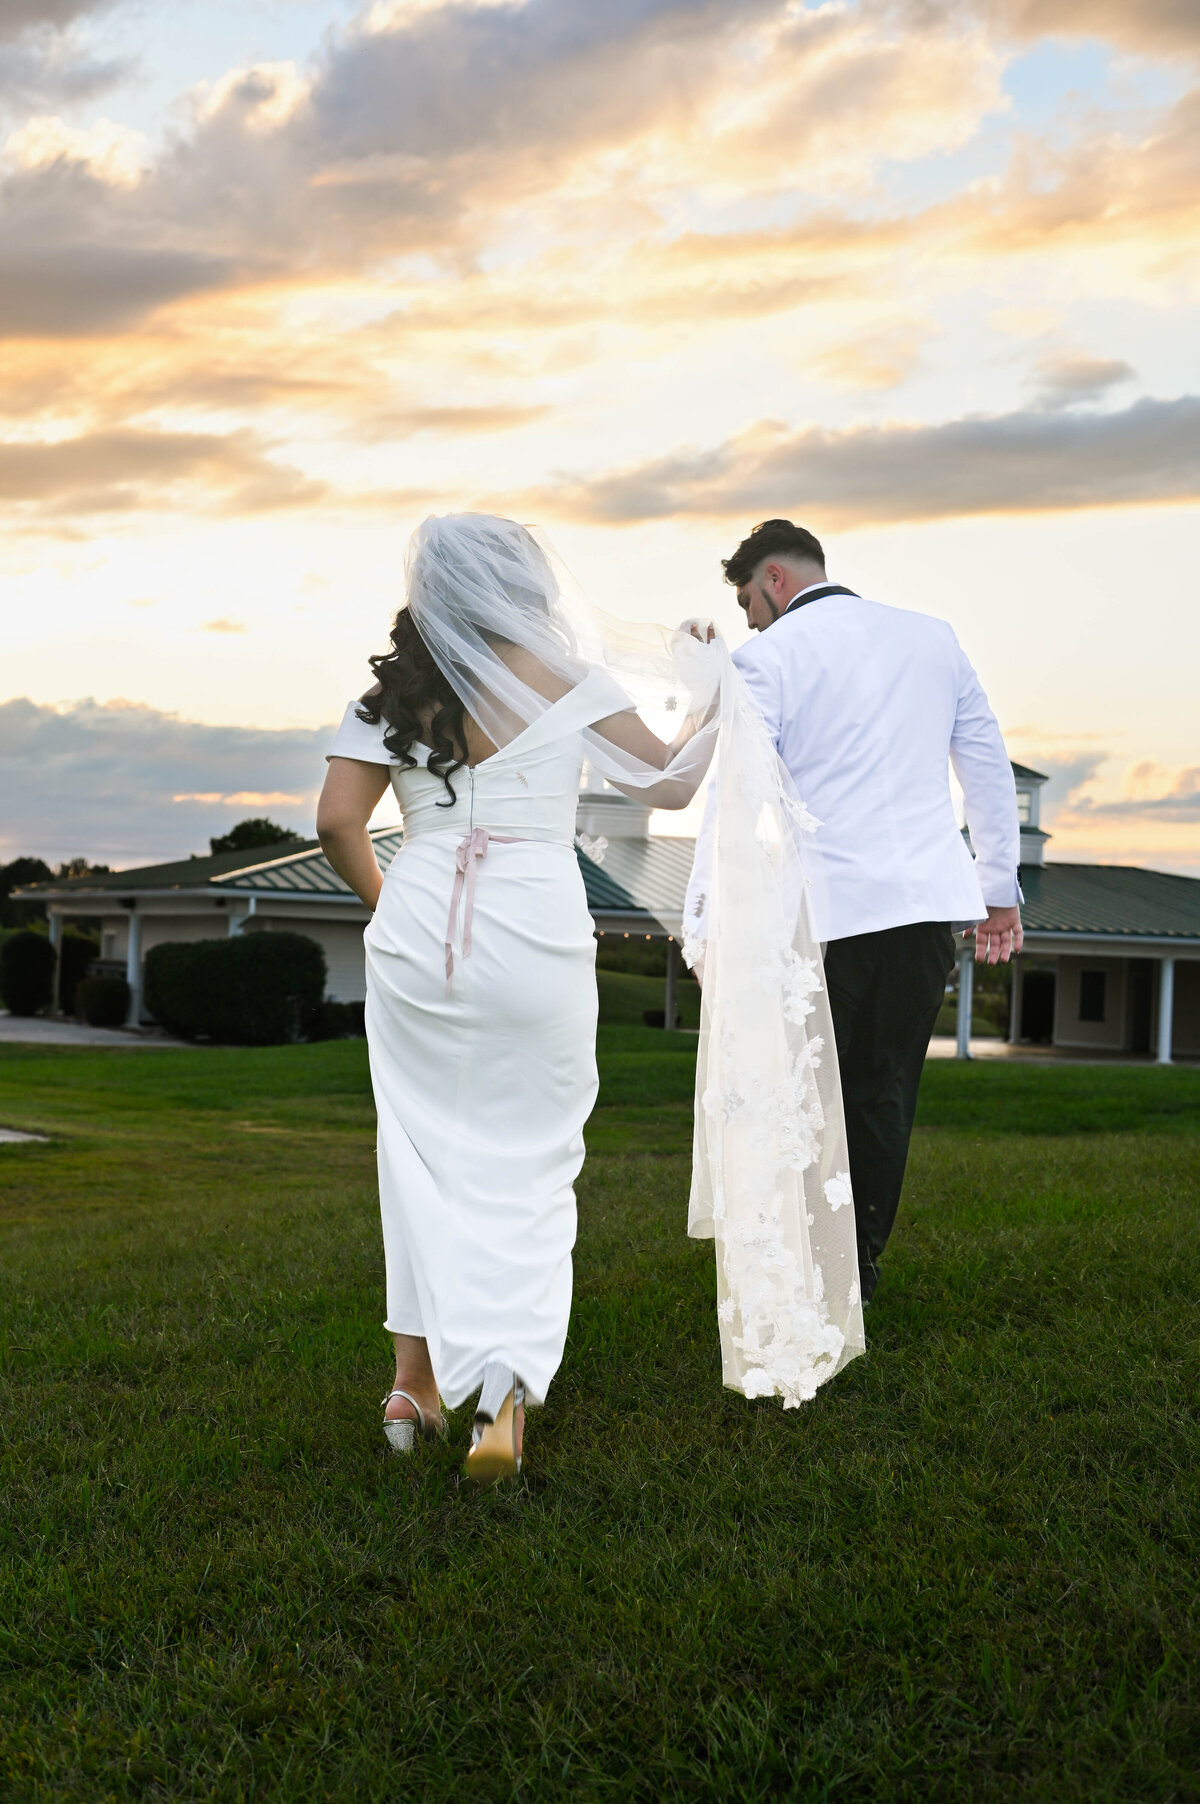 bride and groom just after wedding ceremony as they are walking up a golf course hill at their country club venue.  bride has off the should short sleeves with a mauve or rose fabric belt.  Groom in tux with white jacket and black pants.  Groom is helping bride carry her veil